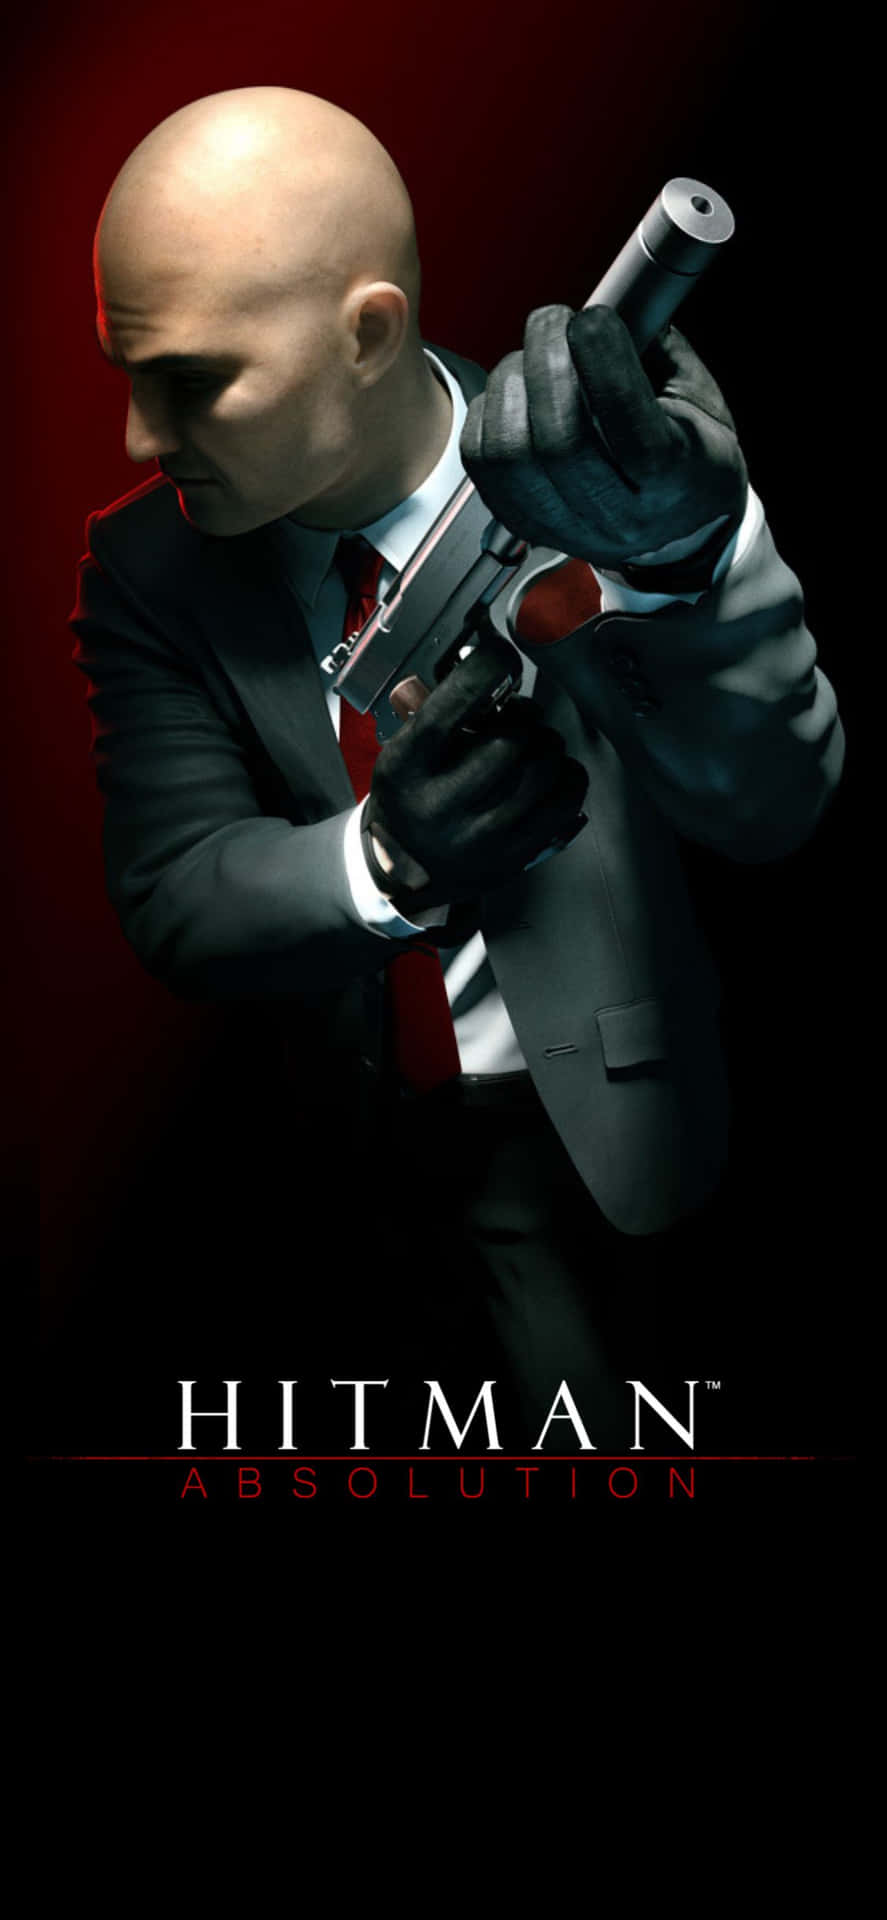 Play Hitman Absolution with The iPhone X